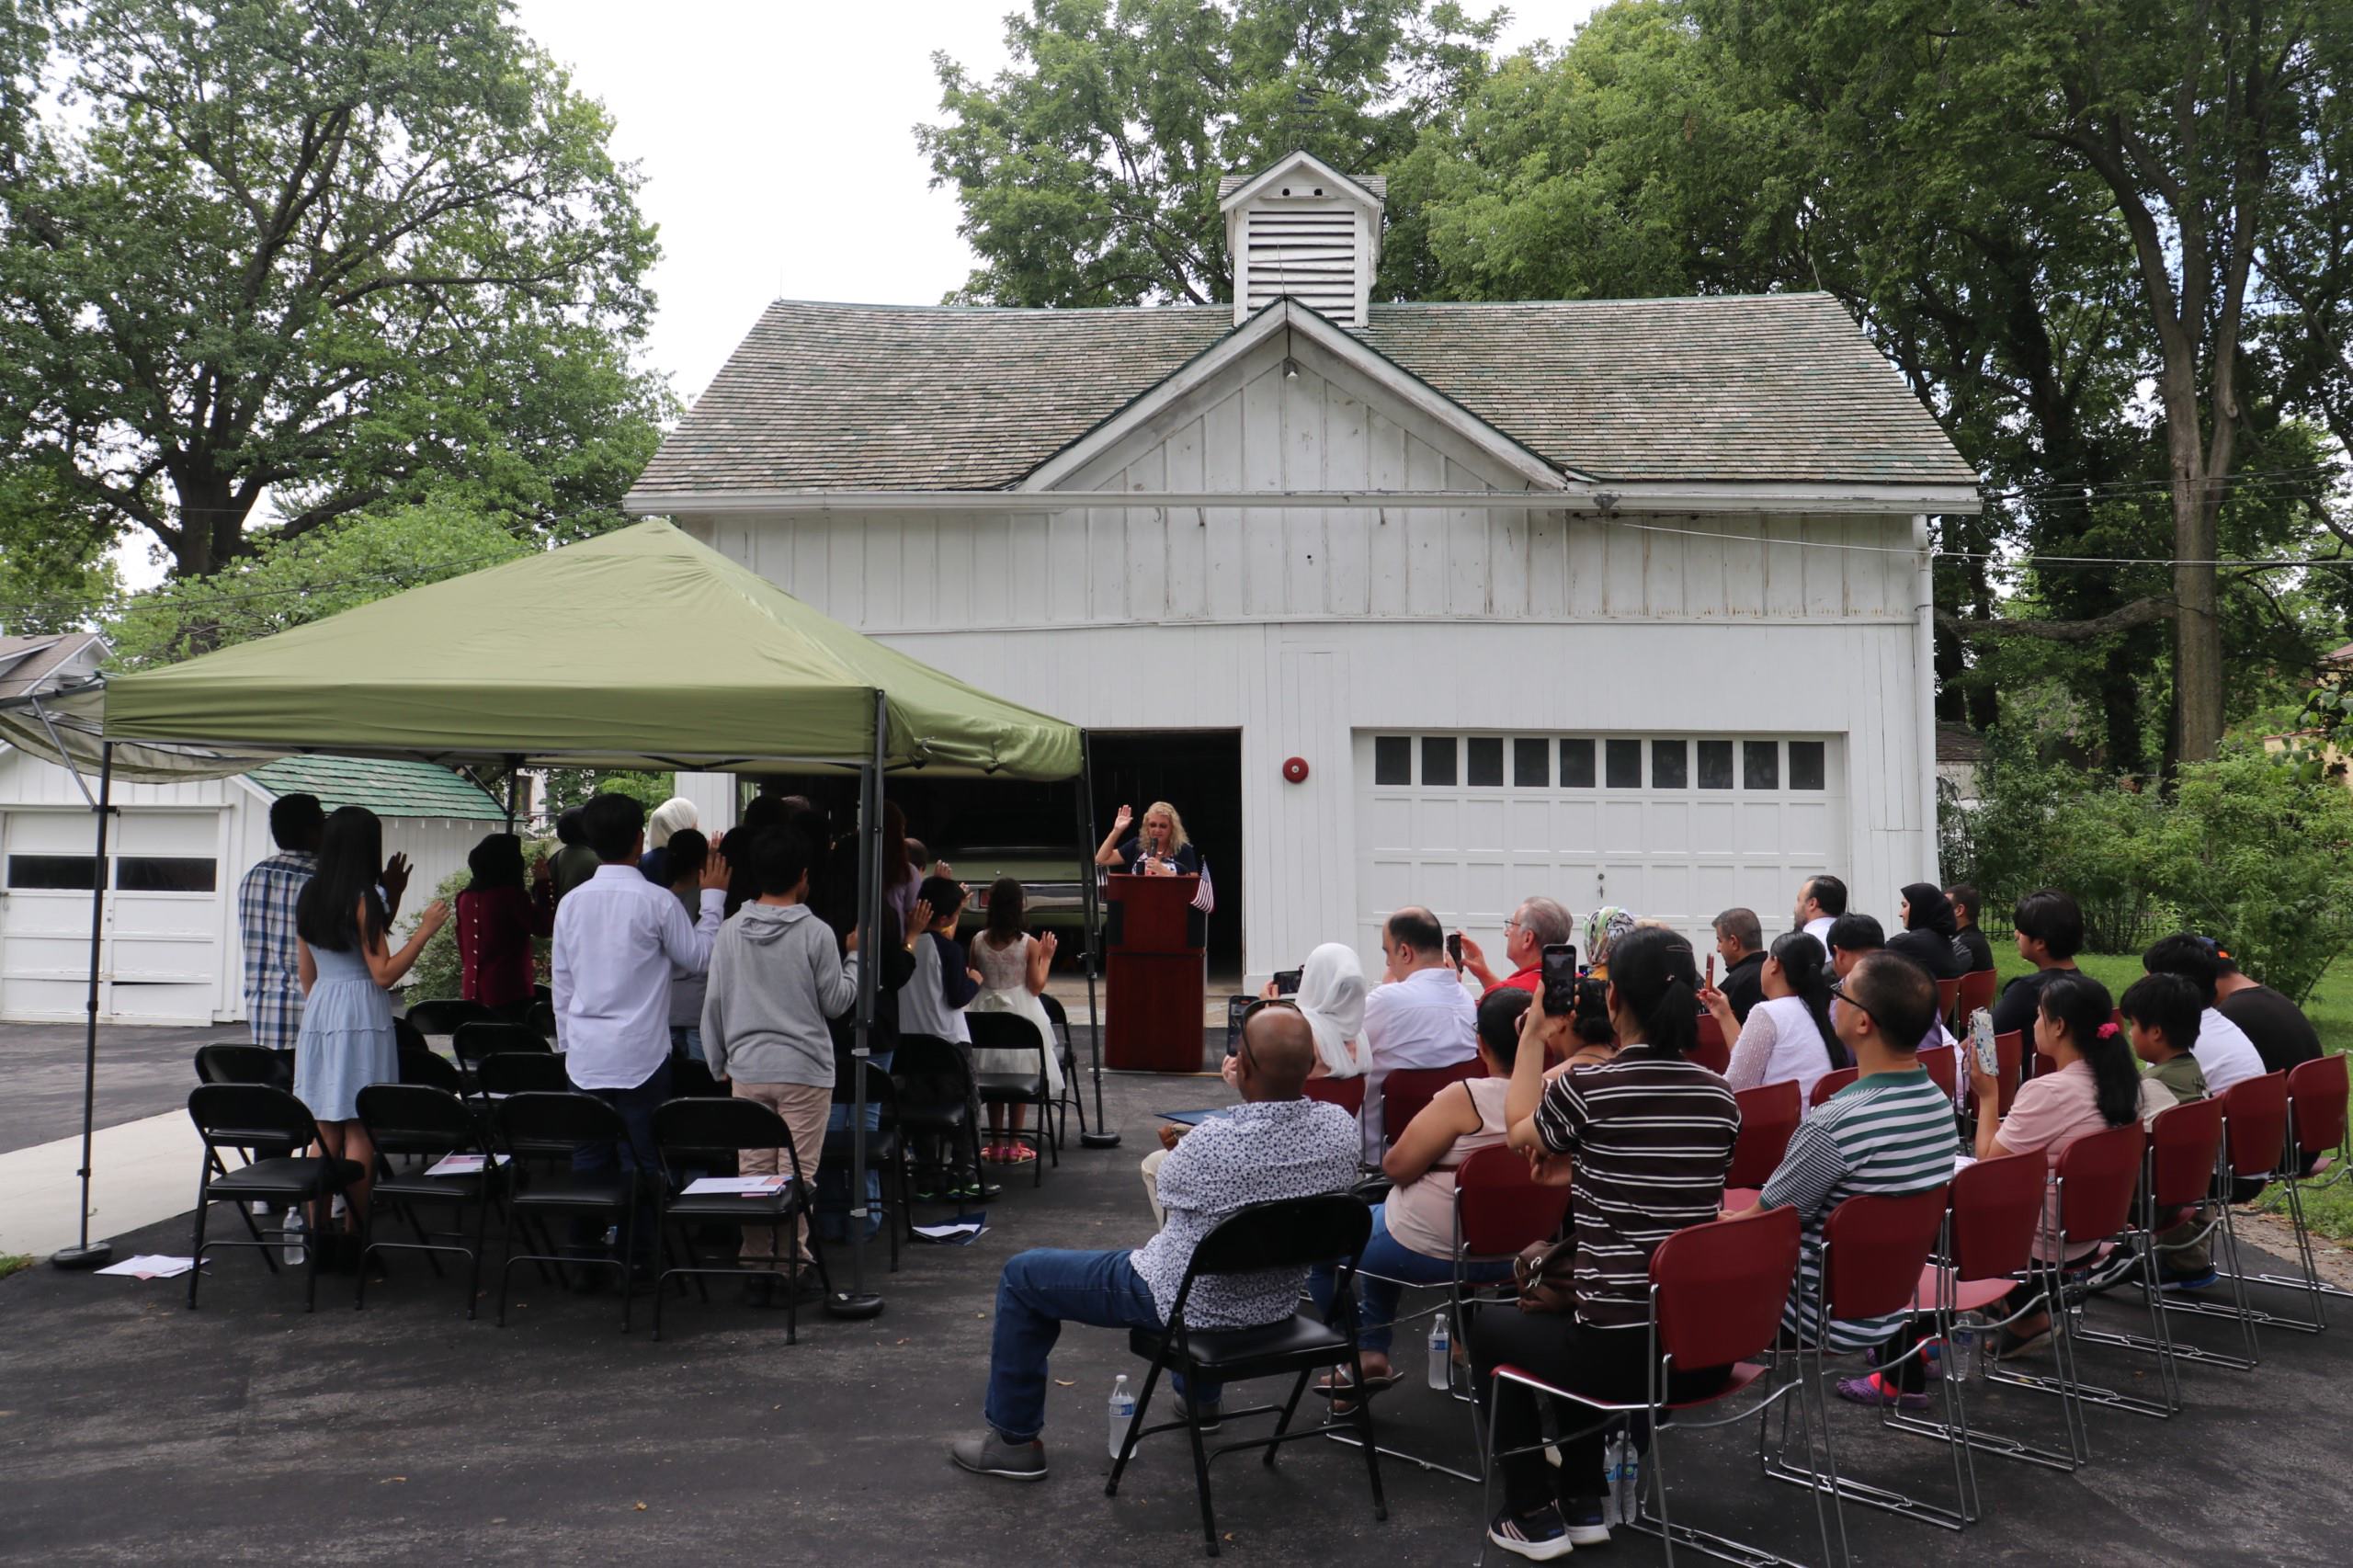 A group of new young citizens take their Oath of Allegiance, their families watch. The Truman garage is in the background, with President and Mrs. Truman's Chrysler showing.